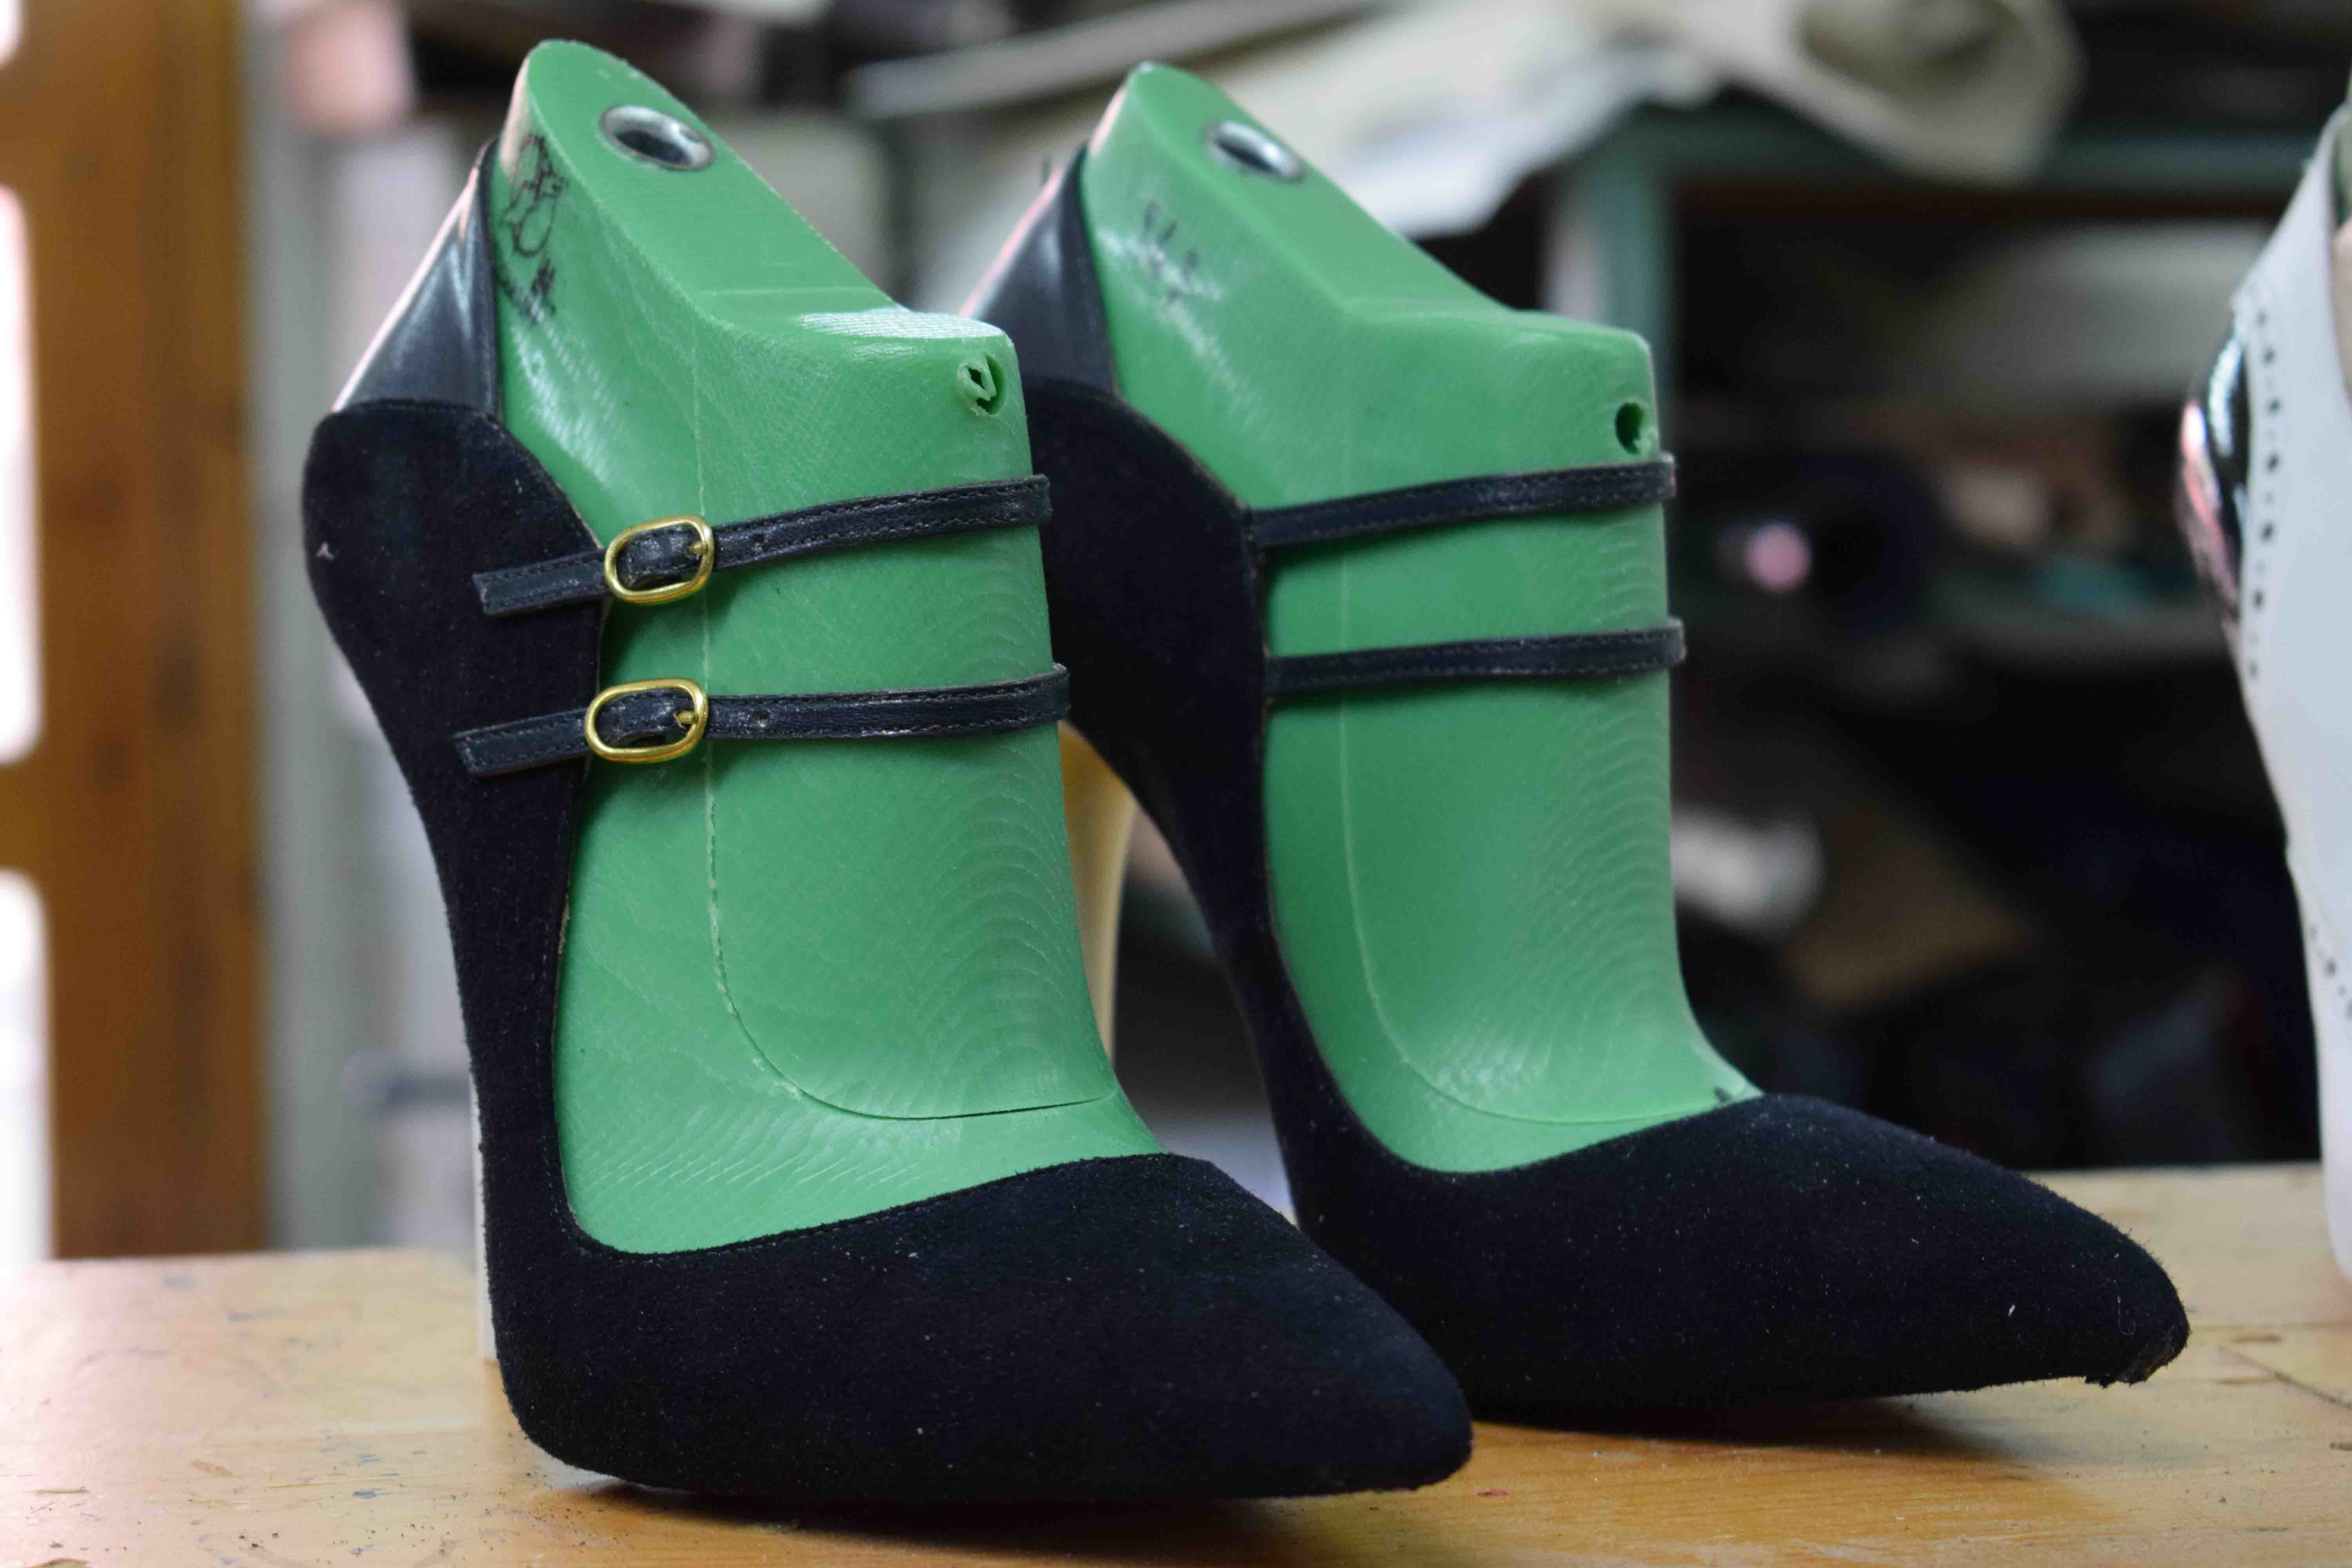 Handmade shoes in production